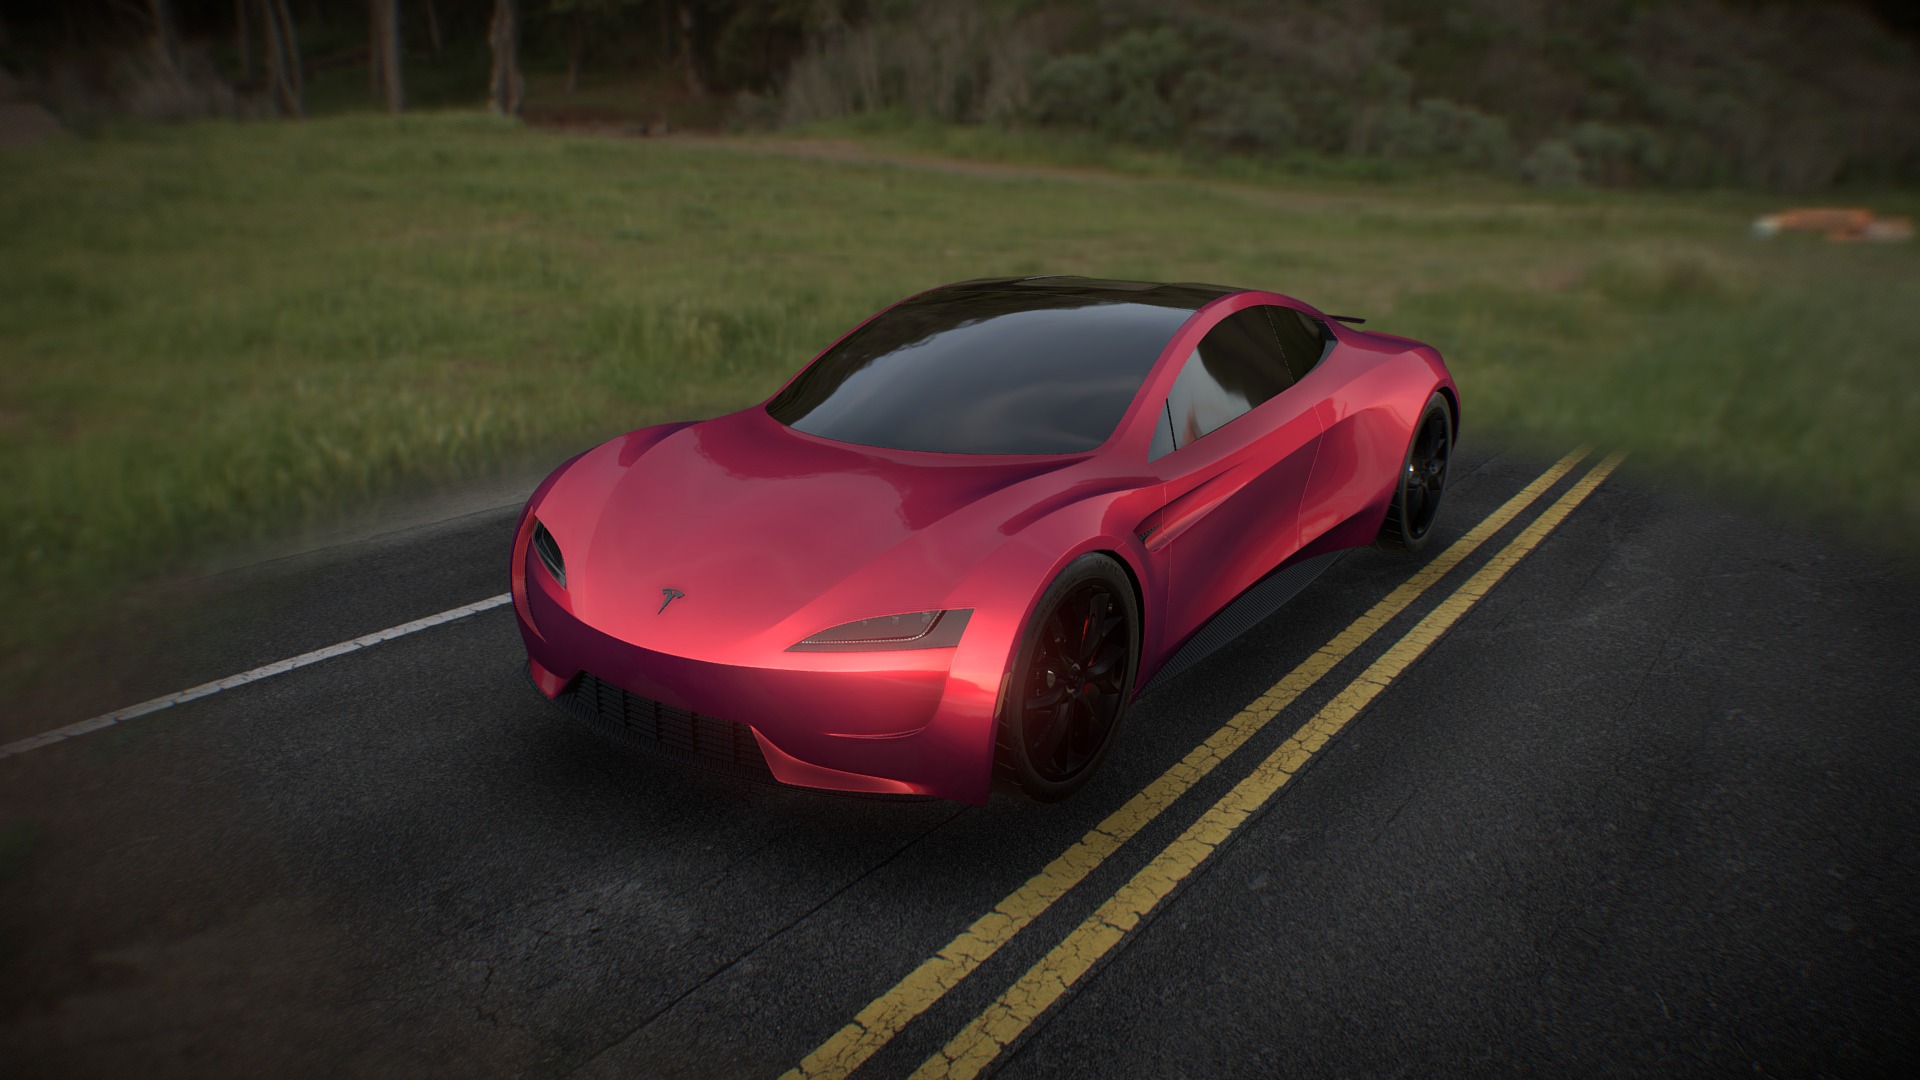 3D model Tesla Roadster Exterior - This is a 3D model of the Tesla Roadster Exterior. The 3D model is about a red sports car on a road.